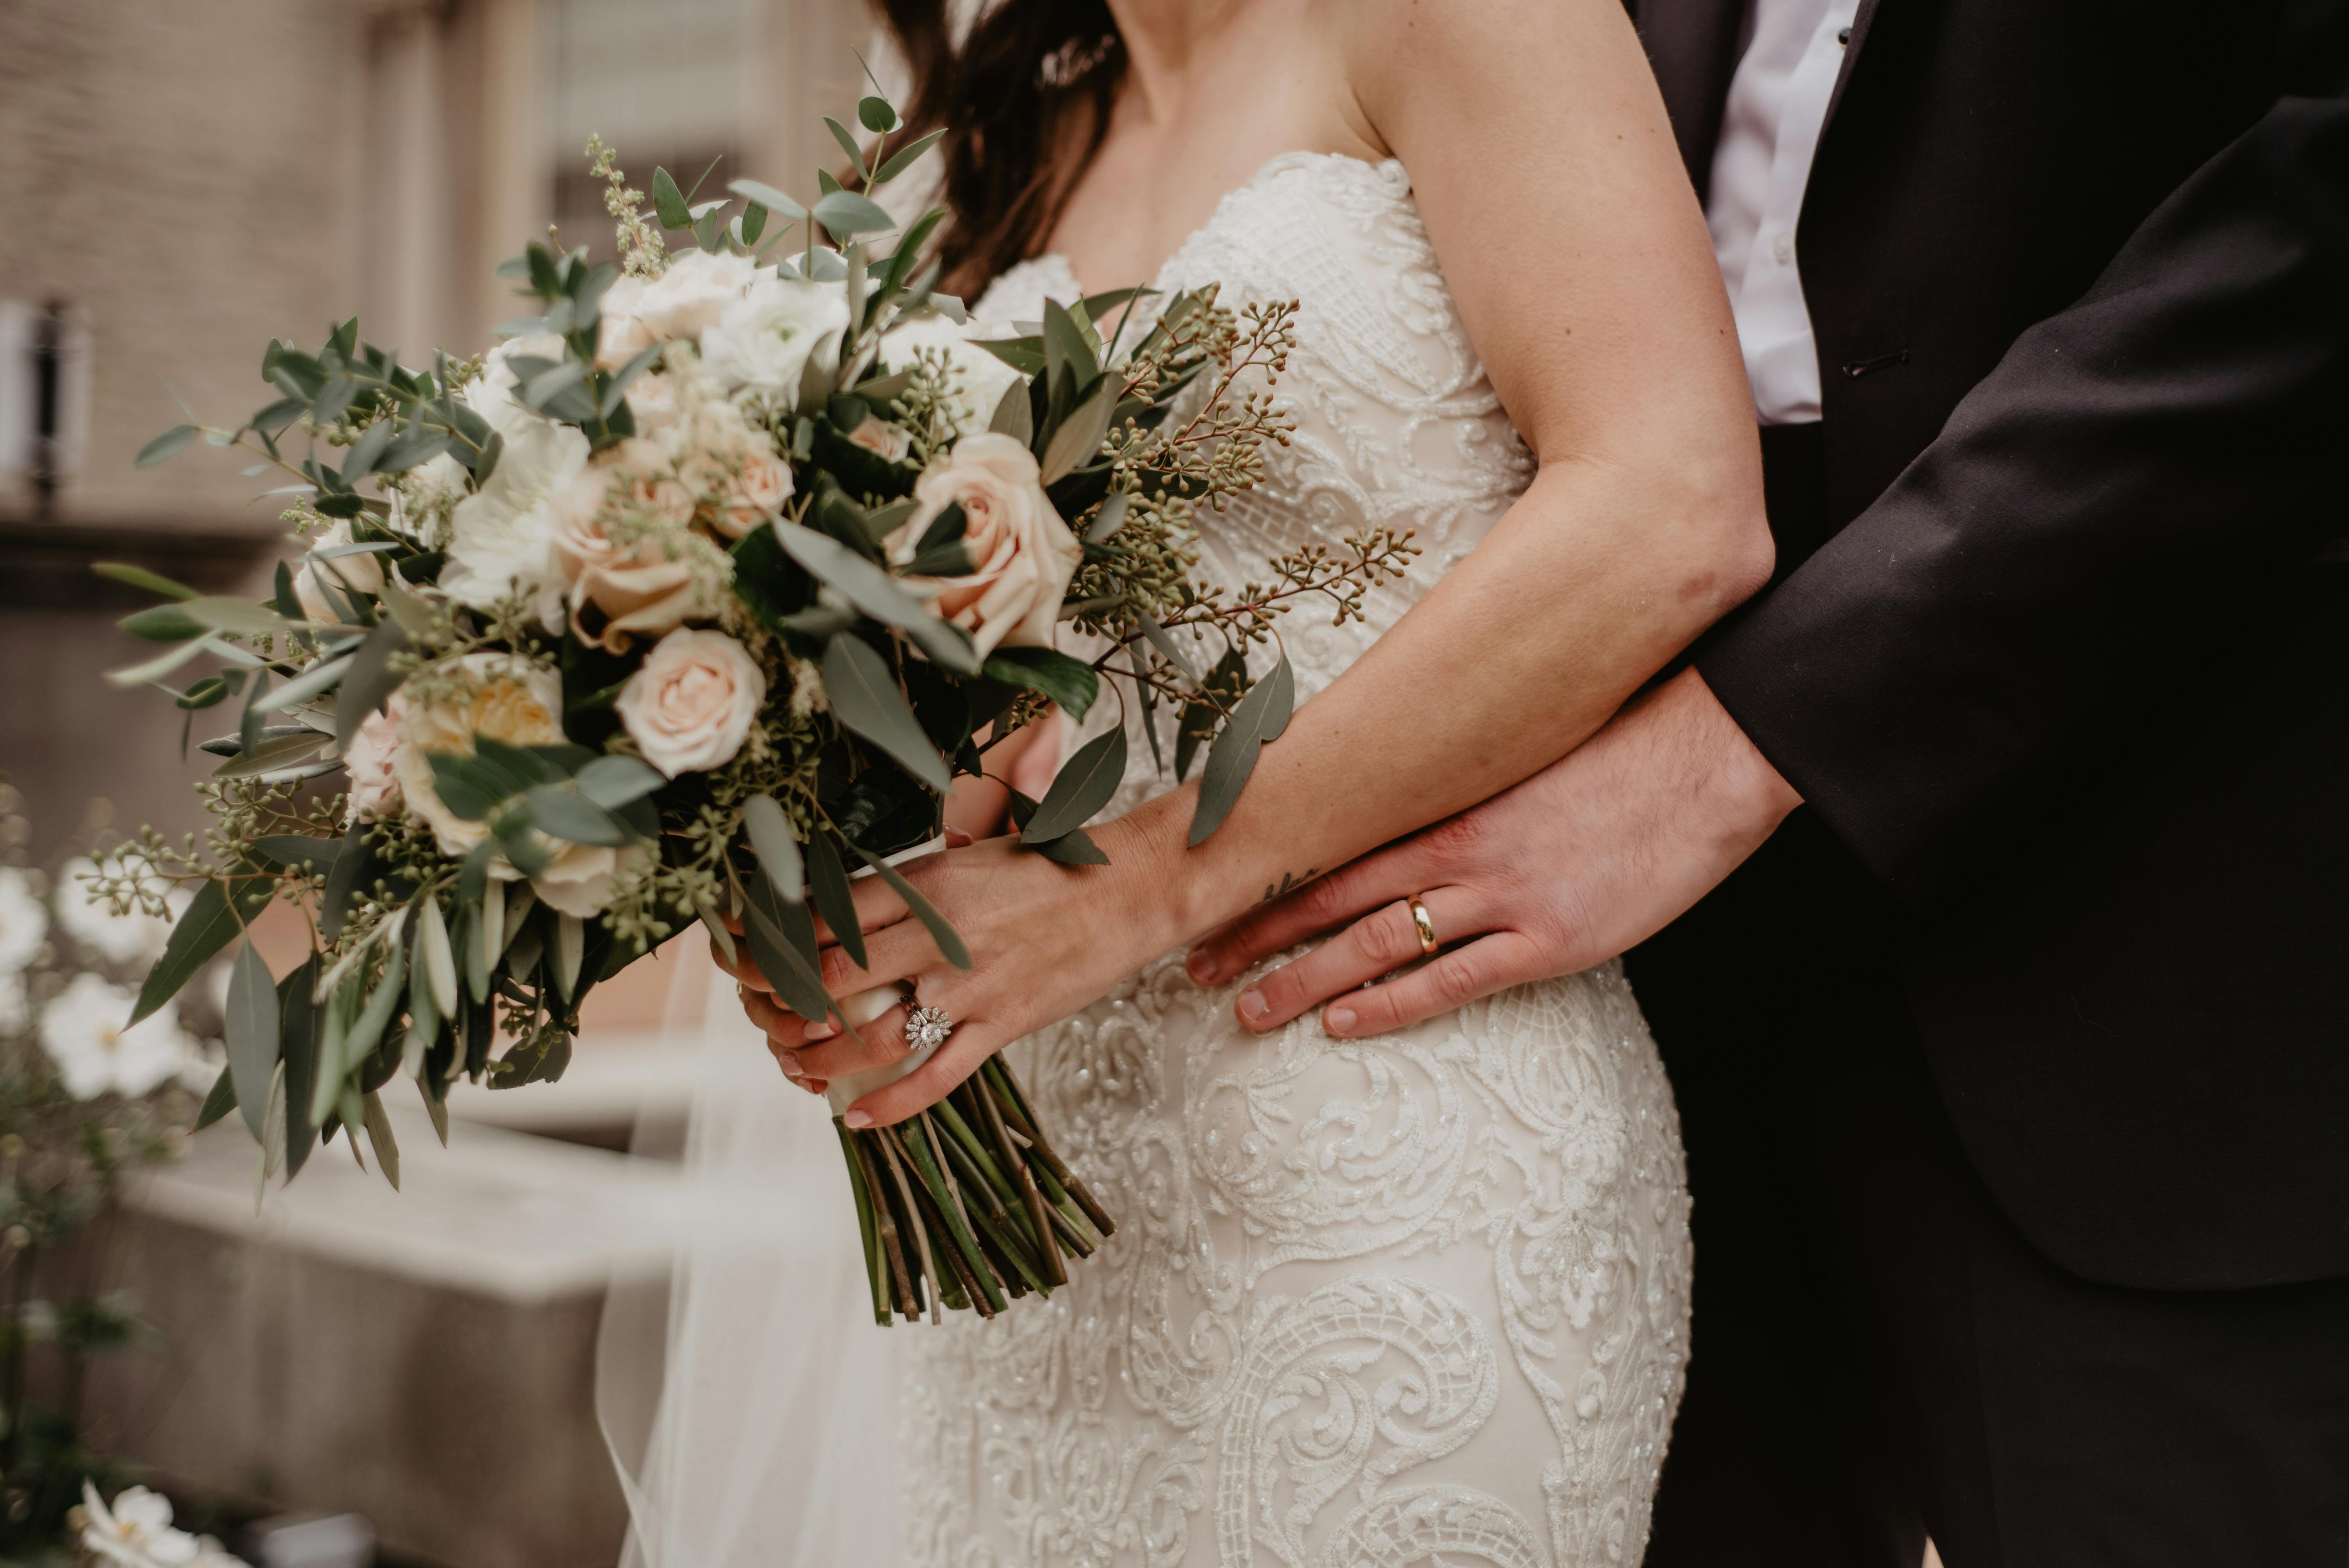 Newly wedded couple | Source: Pexels